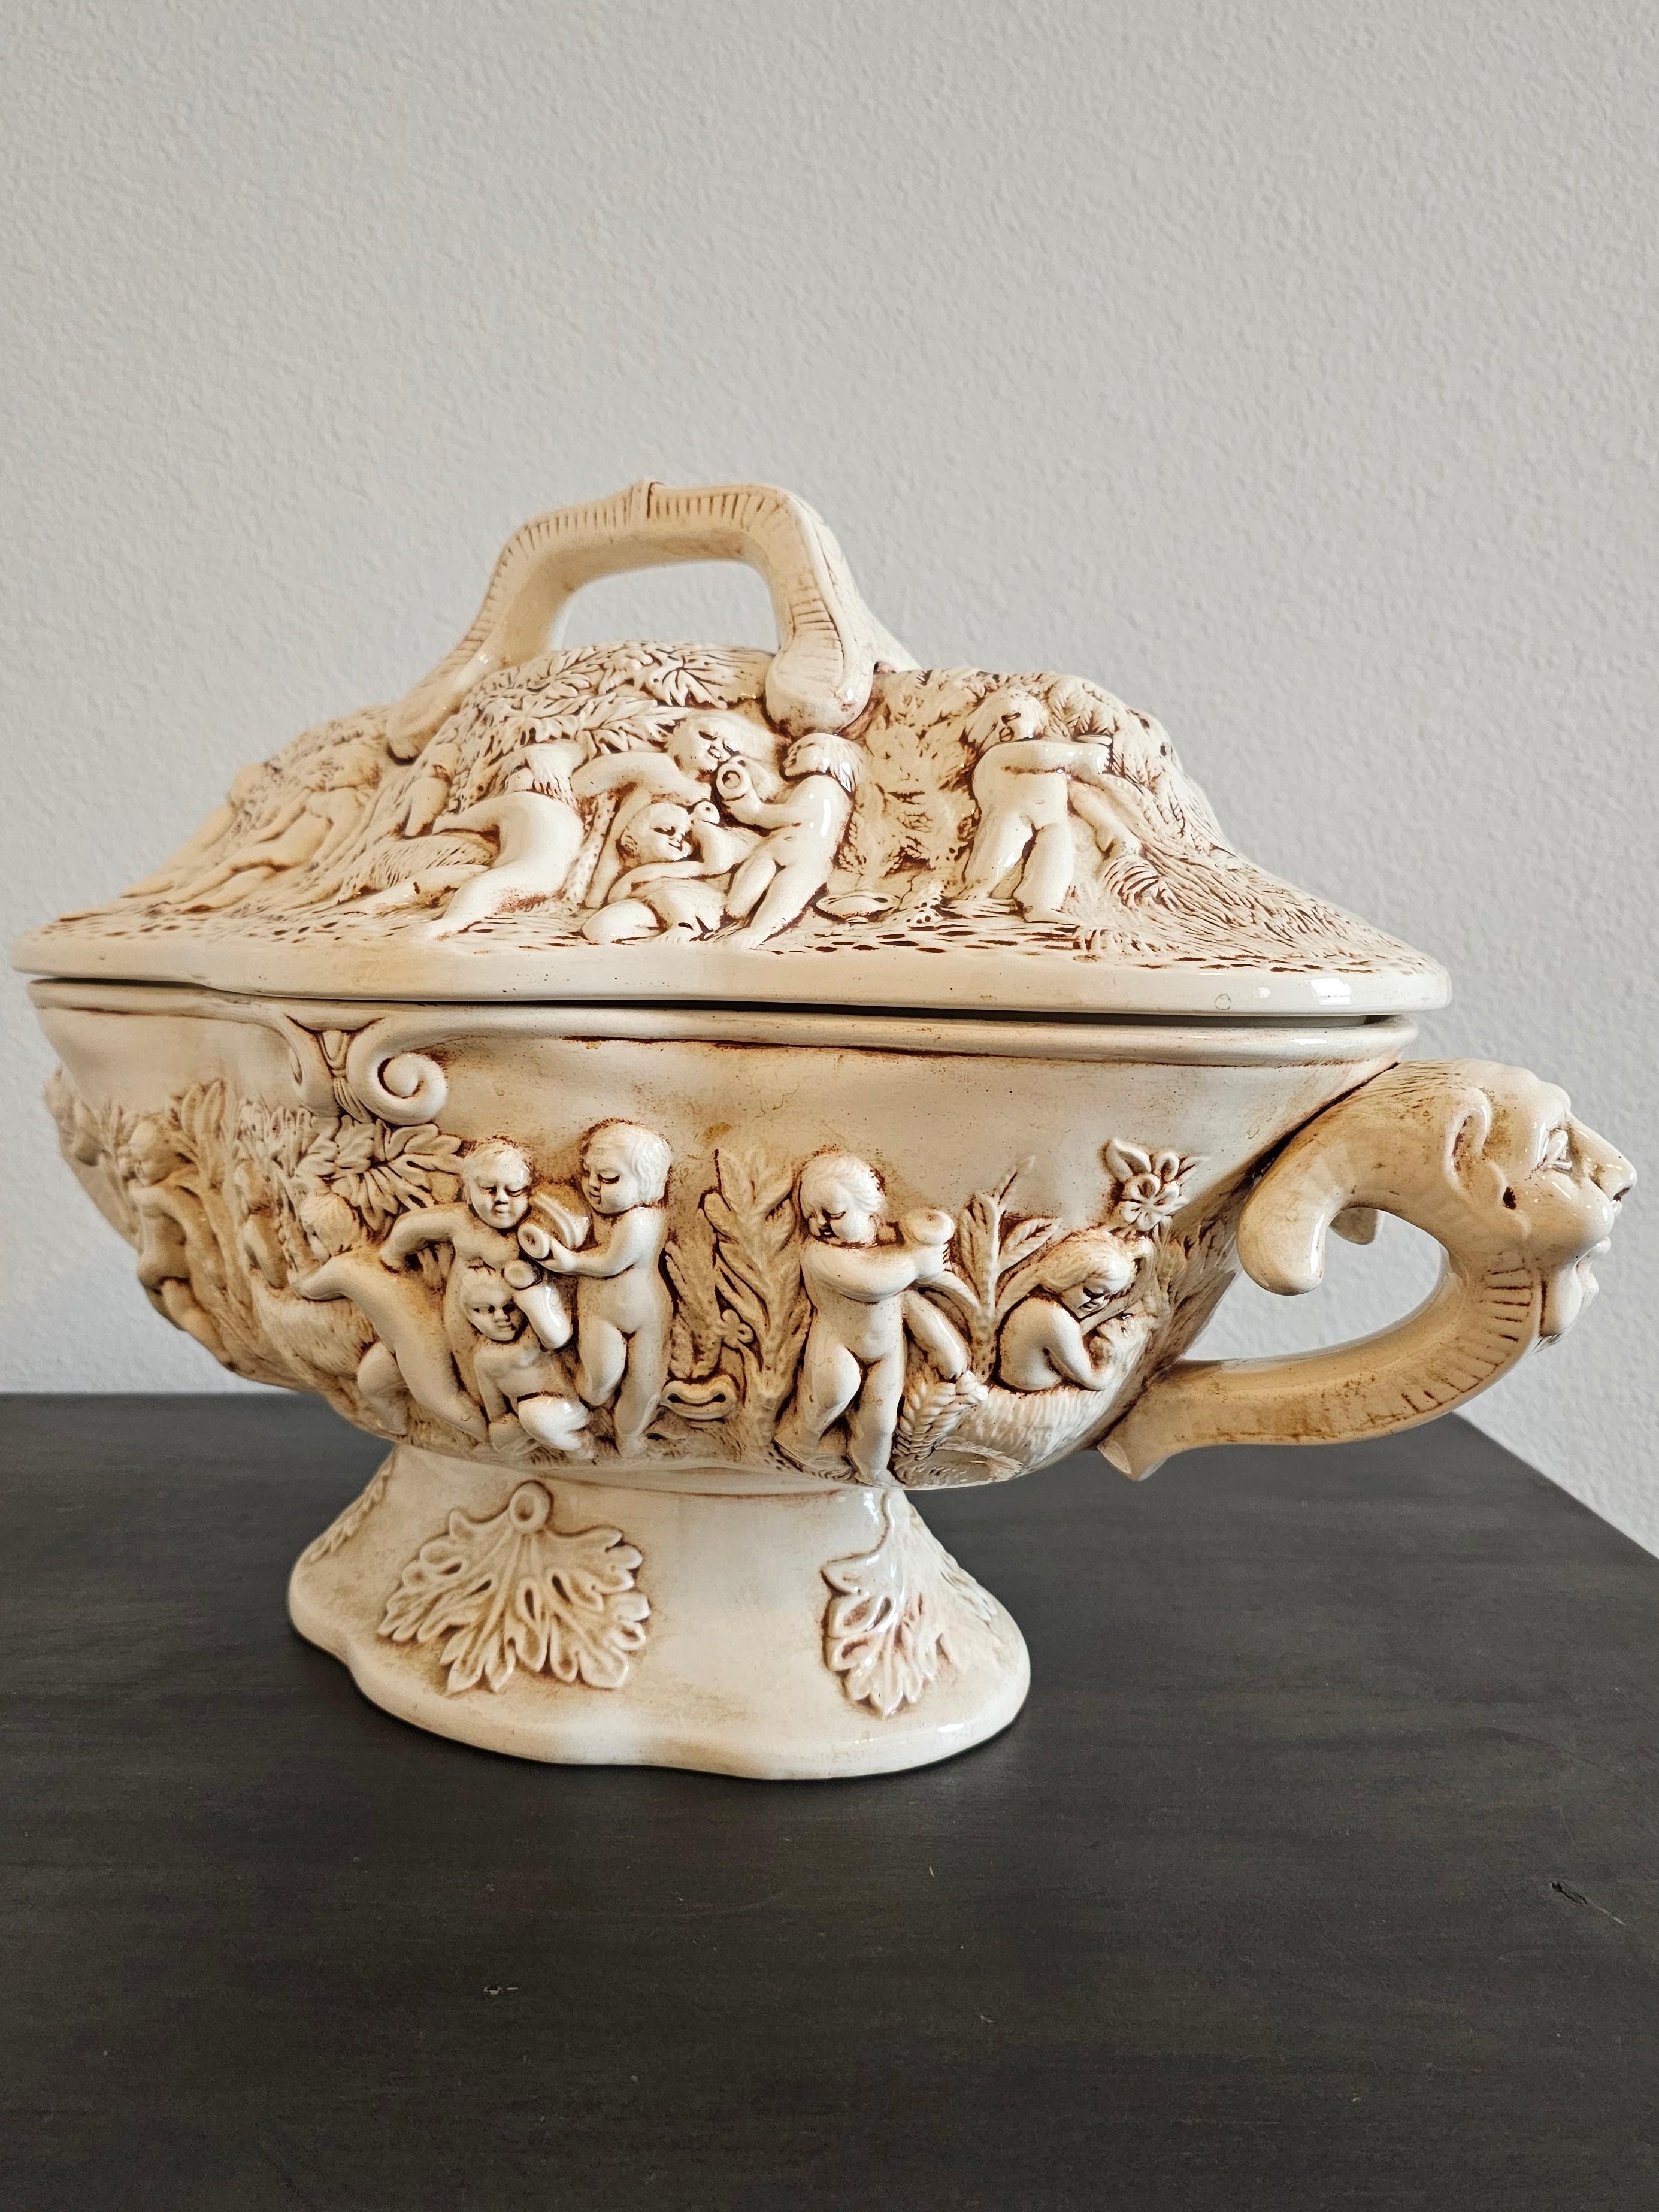 Vintage Italian Capodimonte Porcelain Covered Serving Dish Large Soup Tureen For Sale 1